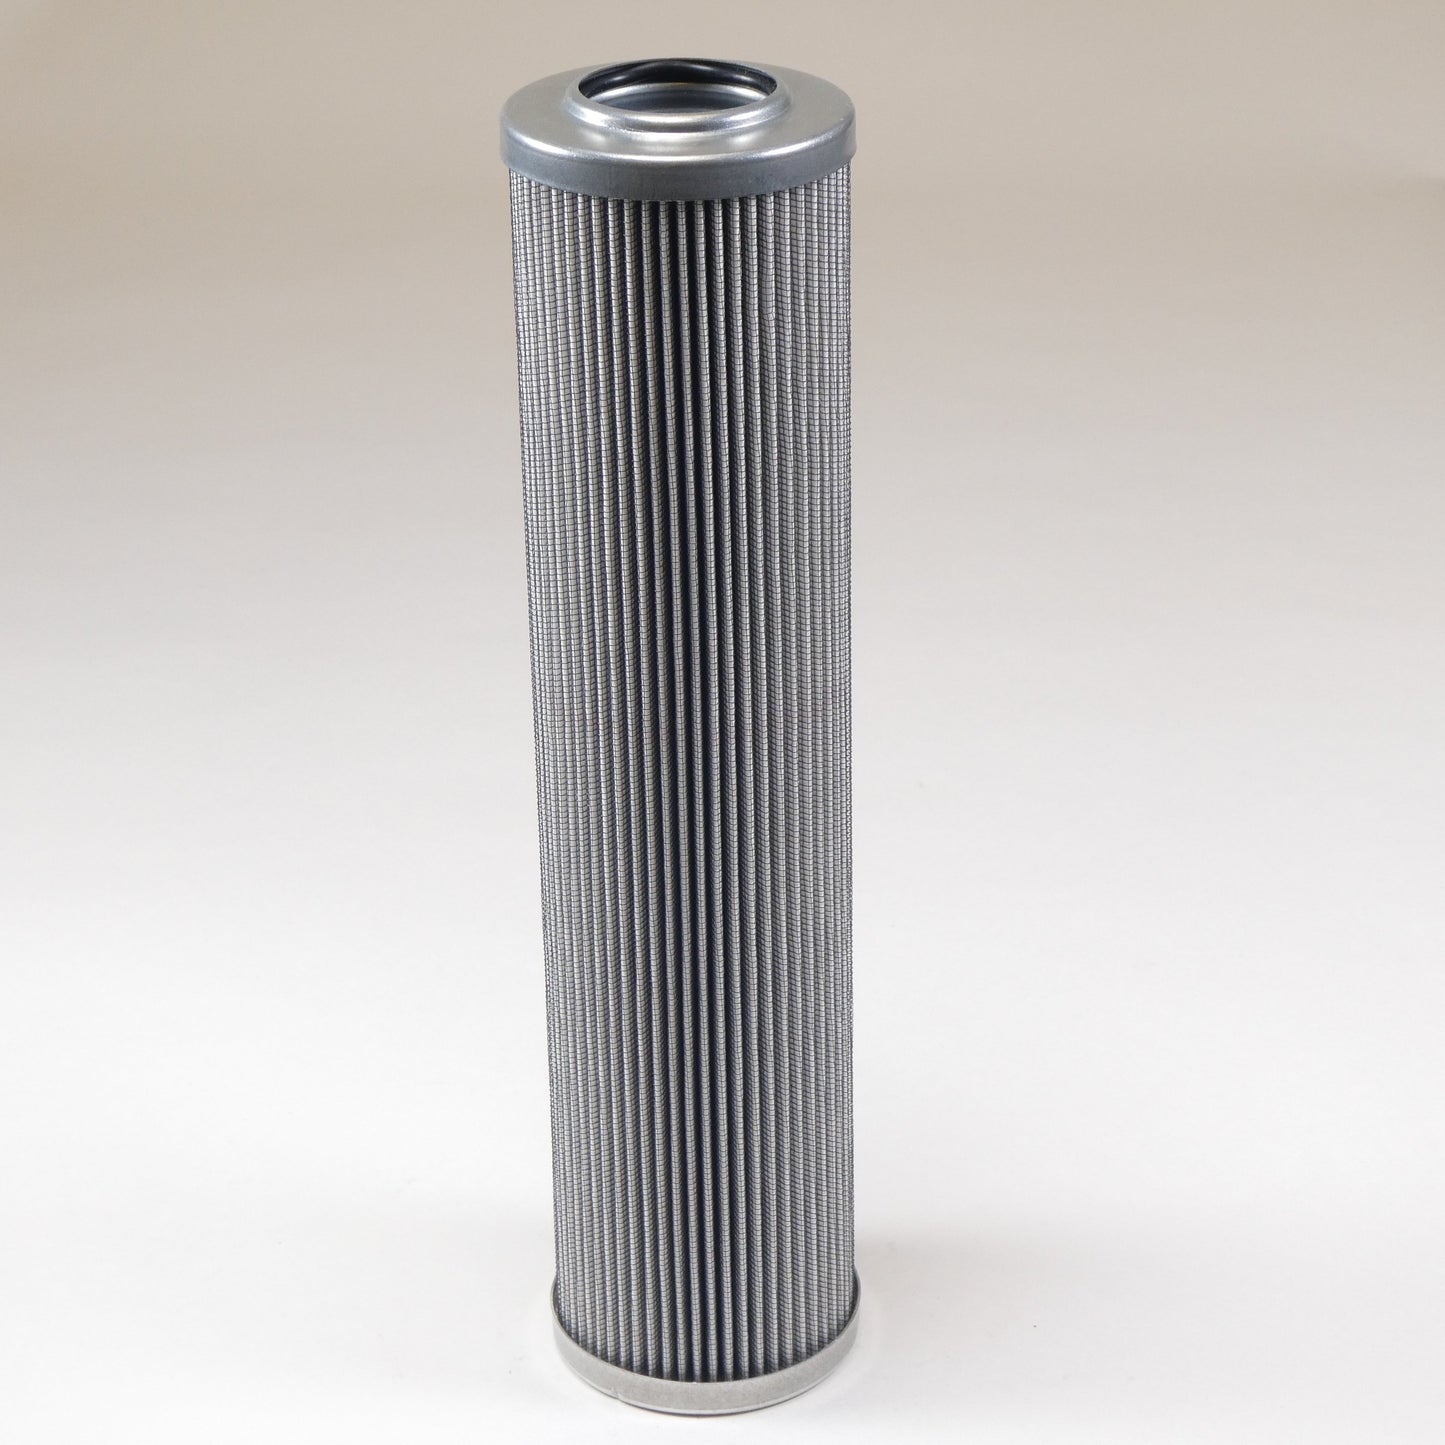 Hydrafil Replacement Filter Element for Hilco 3830-16-035-C